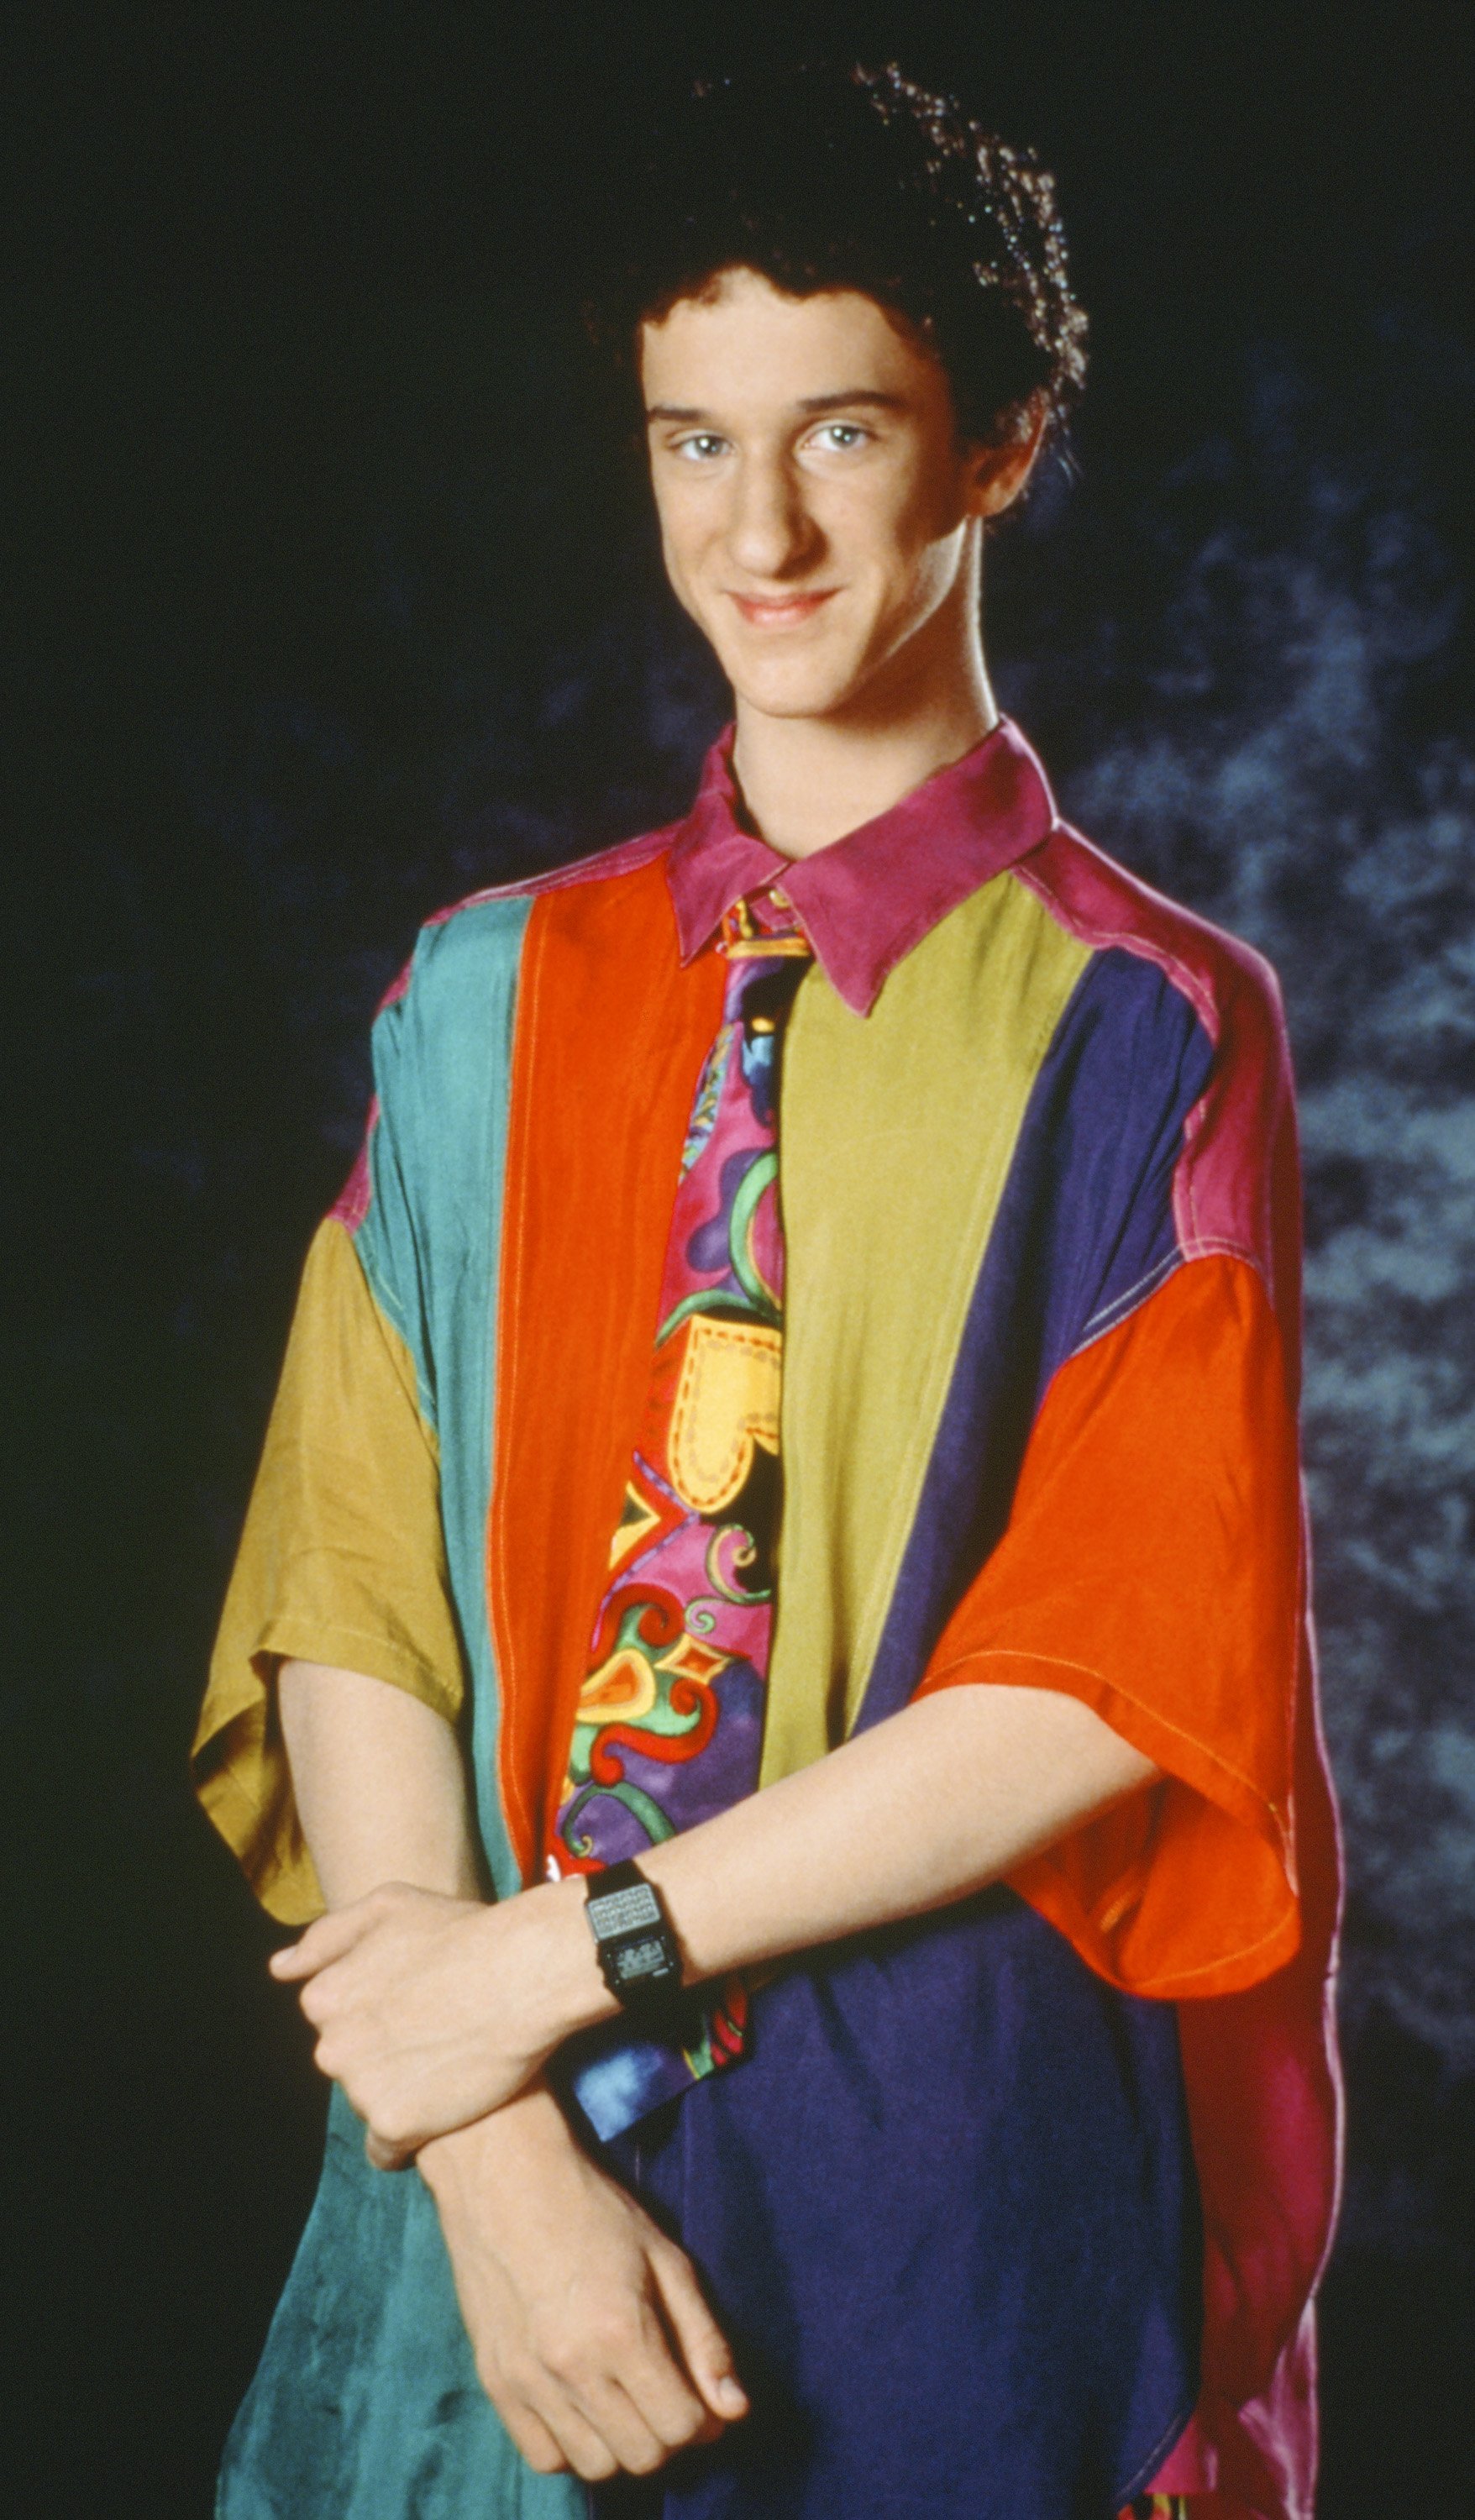 Dustin Diamond as Screech Powers season 4 "Saved by the Bell" | Photo: GettyImages